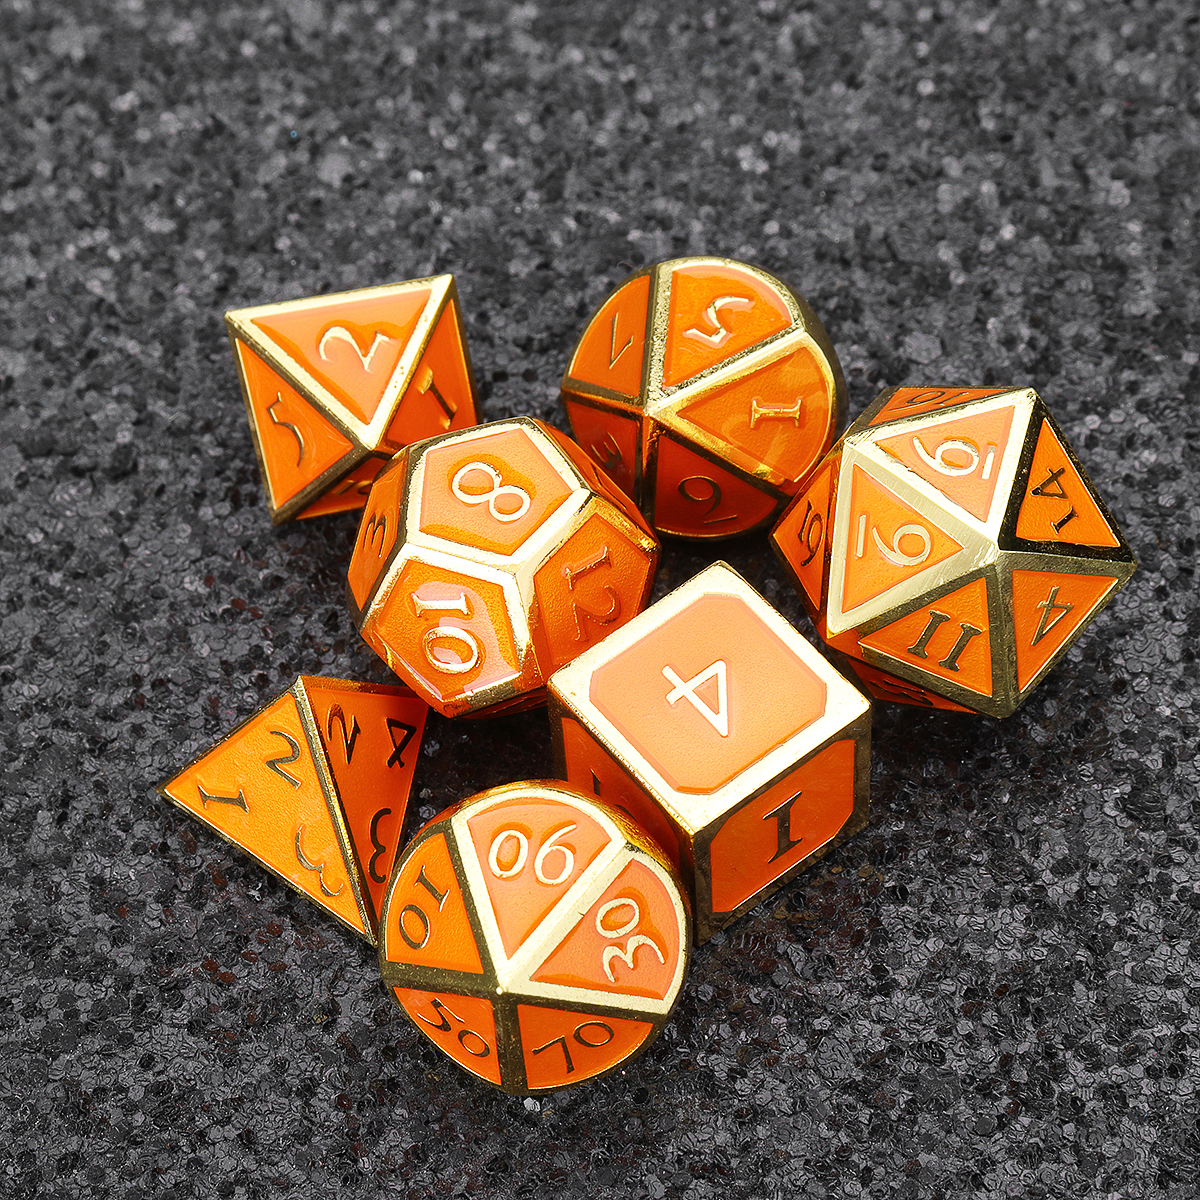 Solid-Metal-Heavy-Dice-Set-Polyhedral-Dices-Role-Playing-Games-Dice-Gadget-RPG-1391317-1